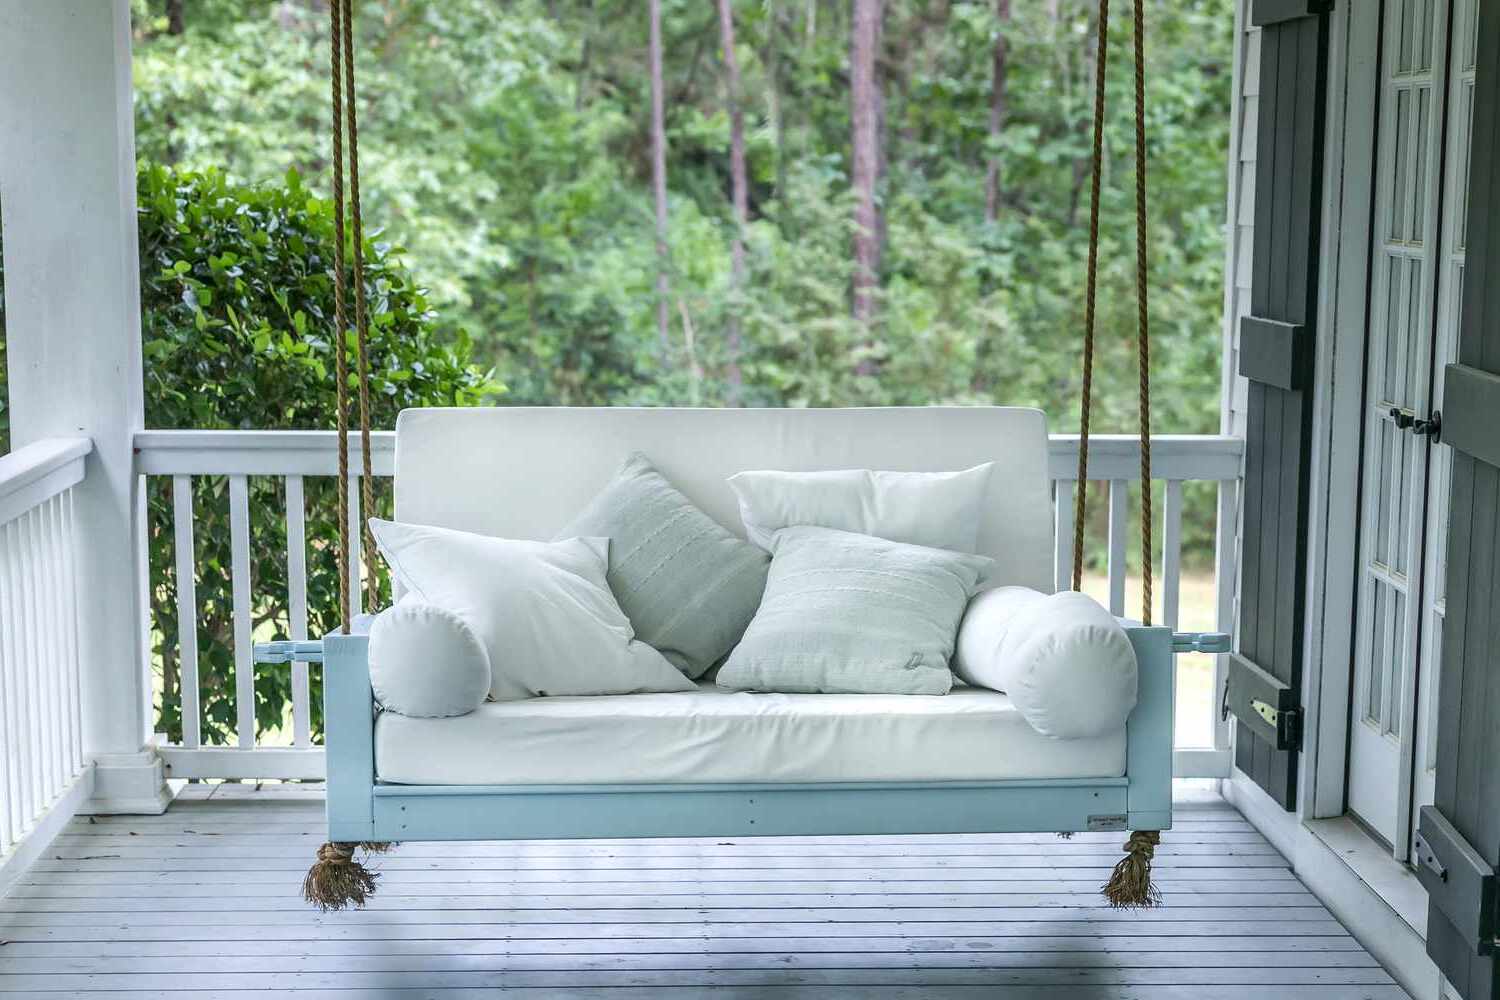 How To Build A Porch Swing